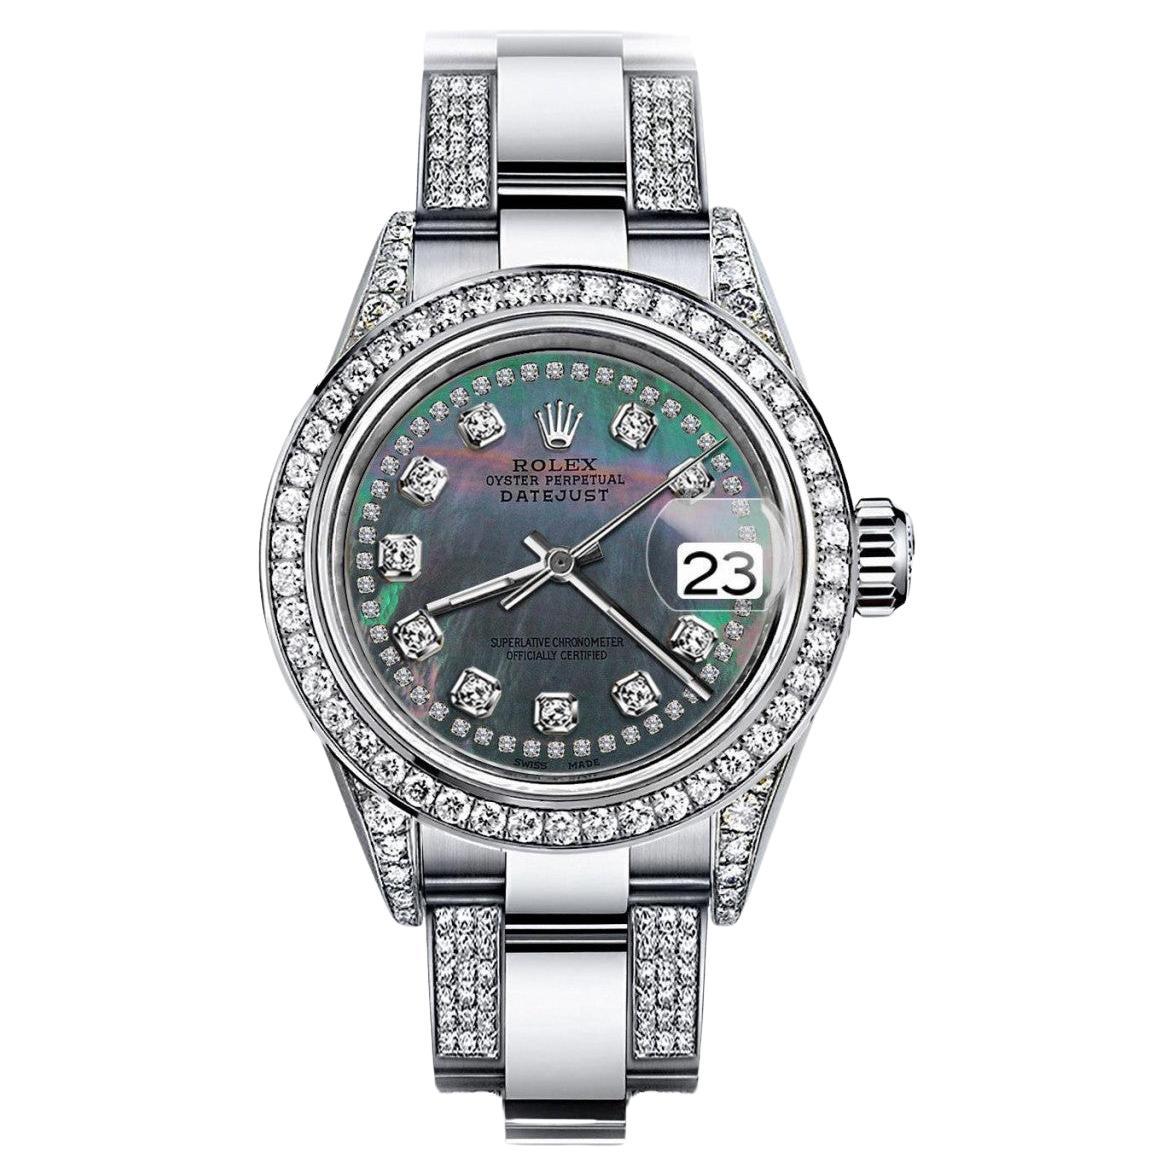 Rolex Black Pearl String Datejust S/S Oyster Perpetual Diamond Side + Bezel For Sale